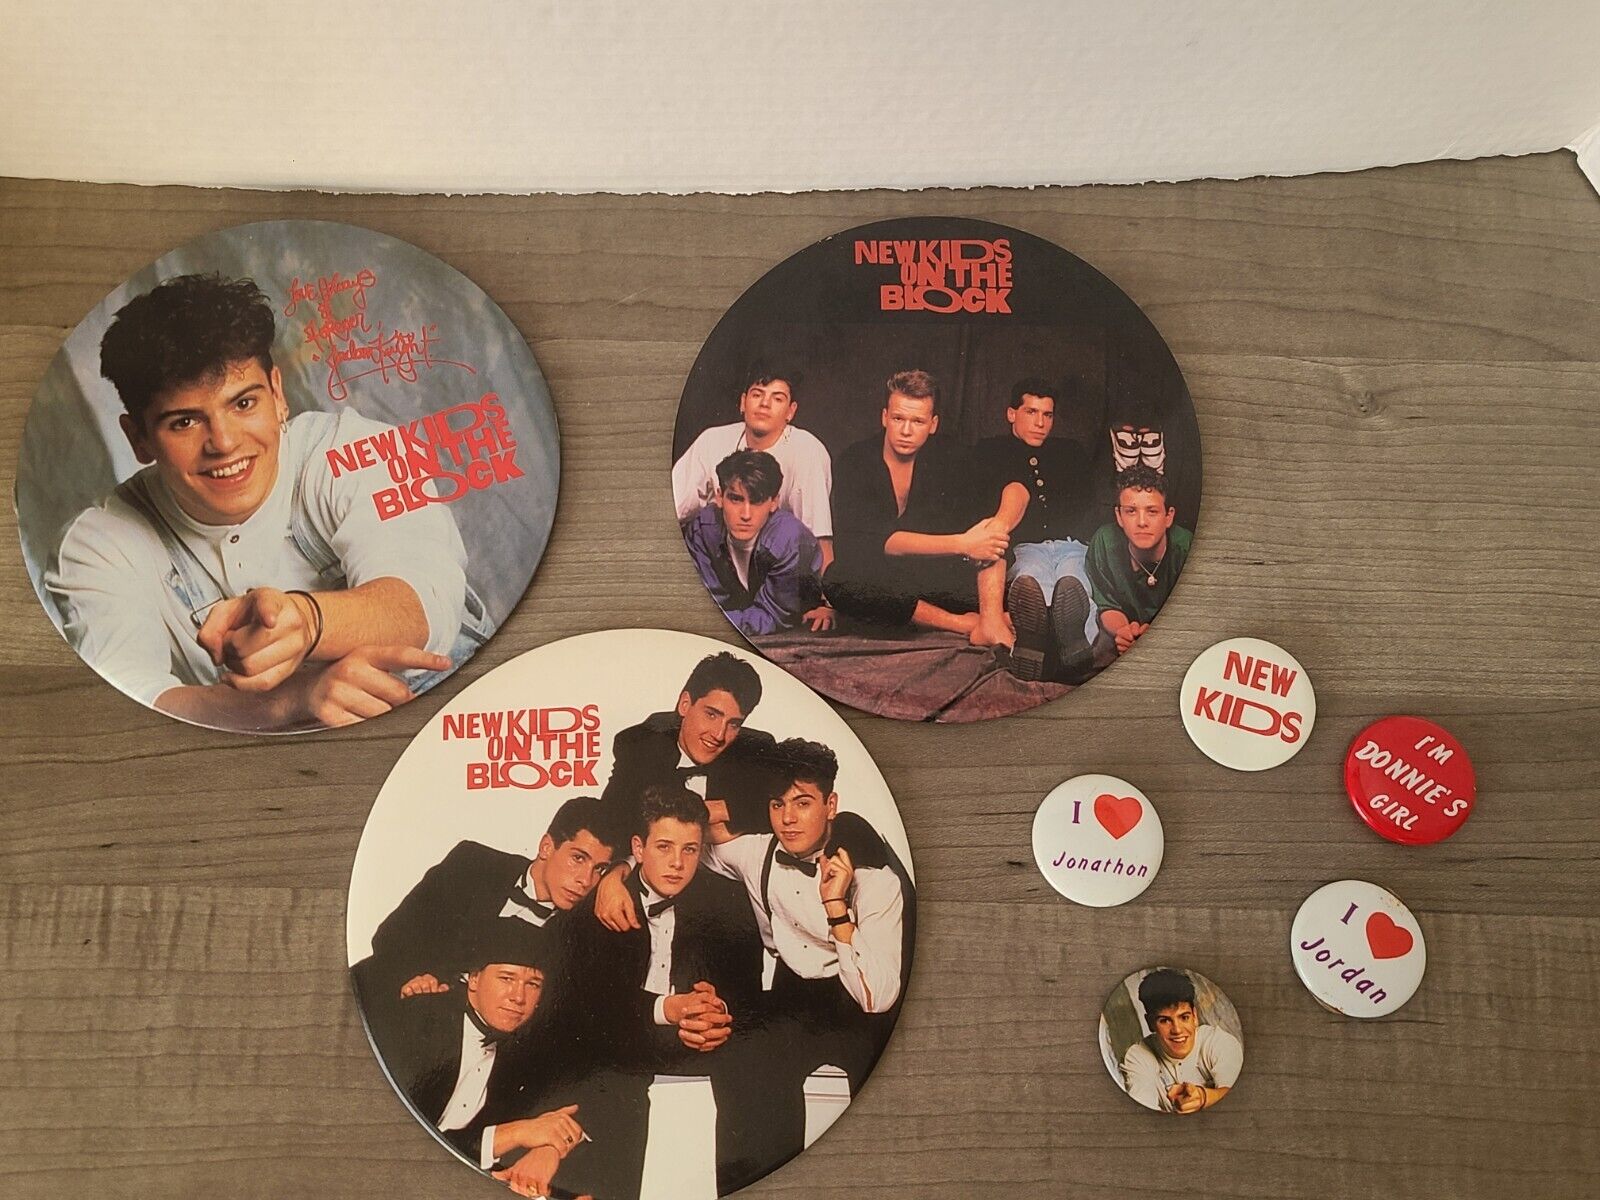 VTG 3 LARGE & 5 SMALL BUTTONS/PINS NEW KIDS ON THE BLOCK 1989 NKOTB Lot of 8